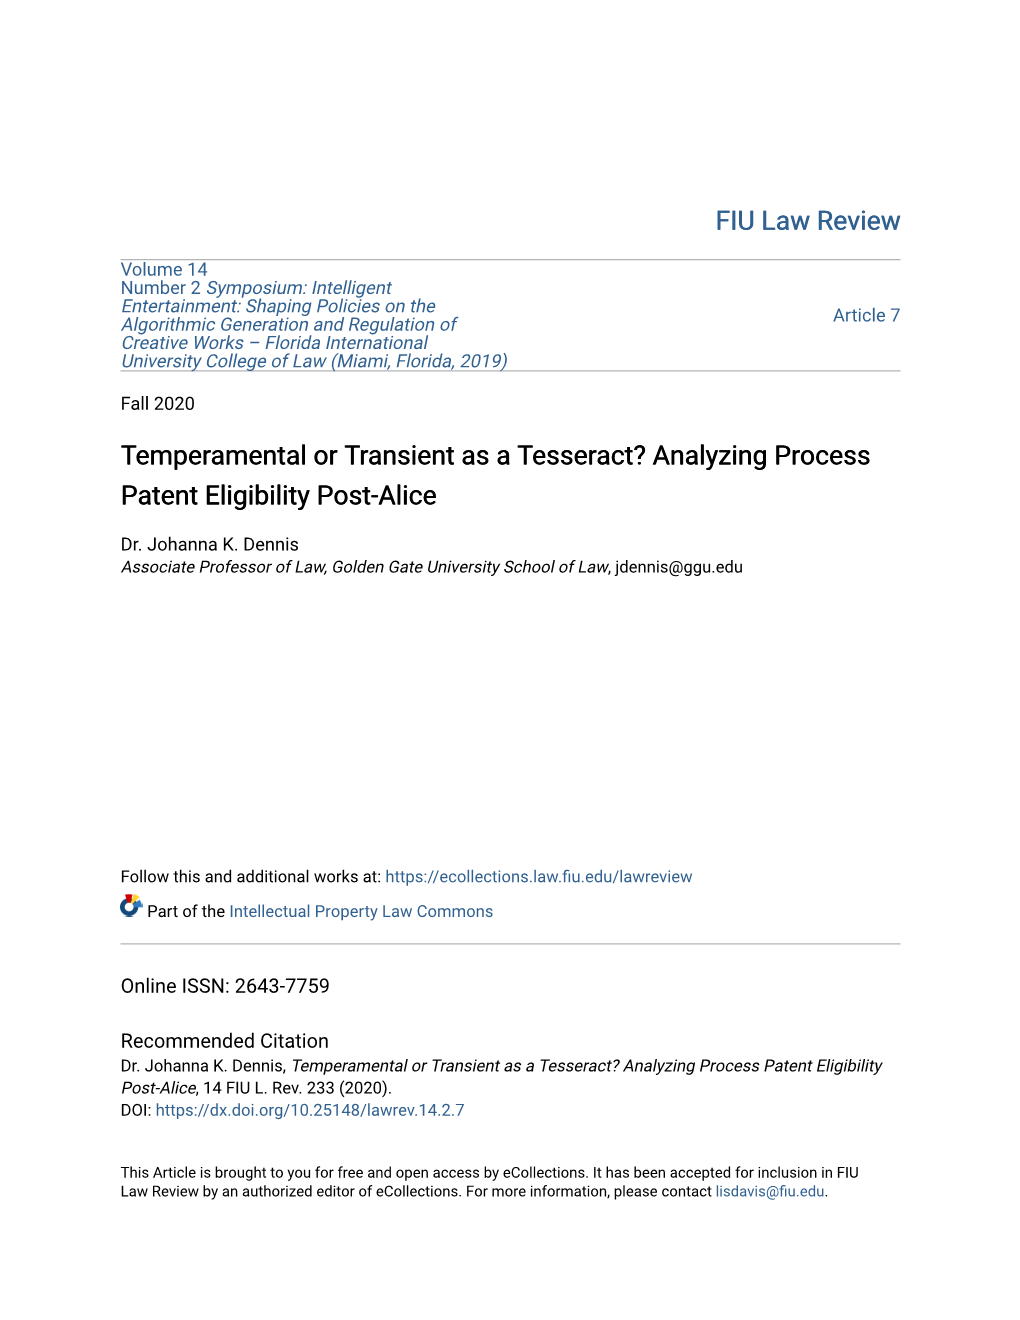 Temperamental Or Transient As a Tesseract? Analyzing Process Patent Eligibility Post-Alice